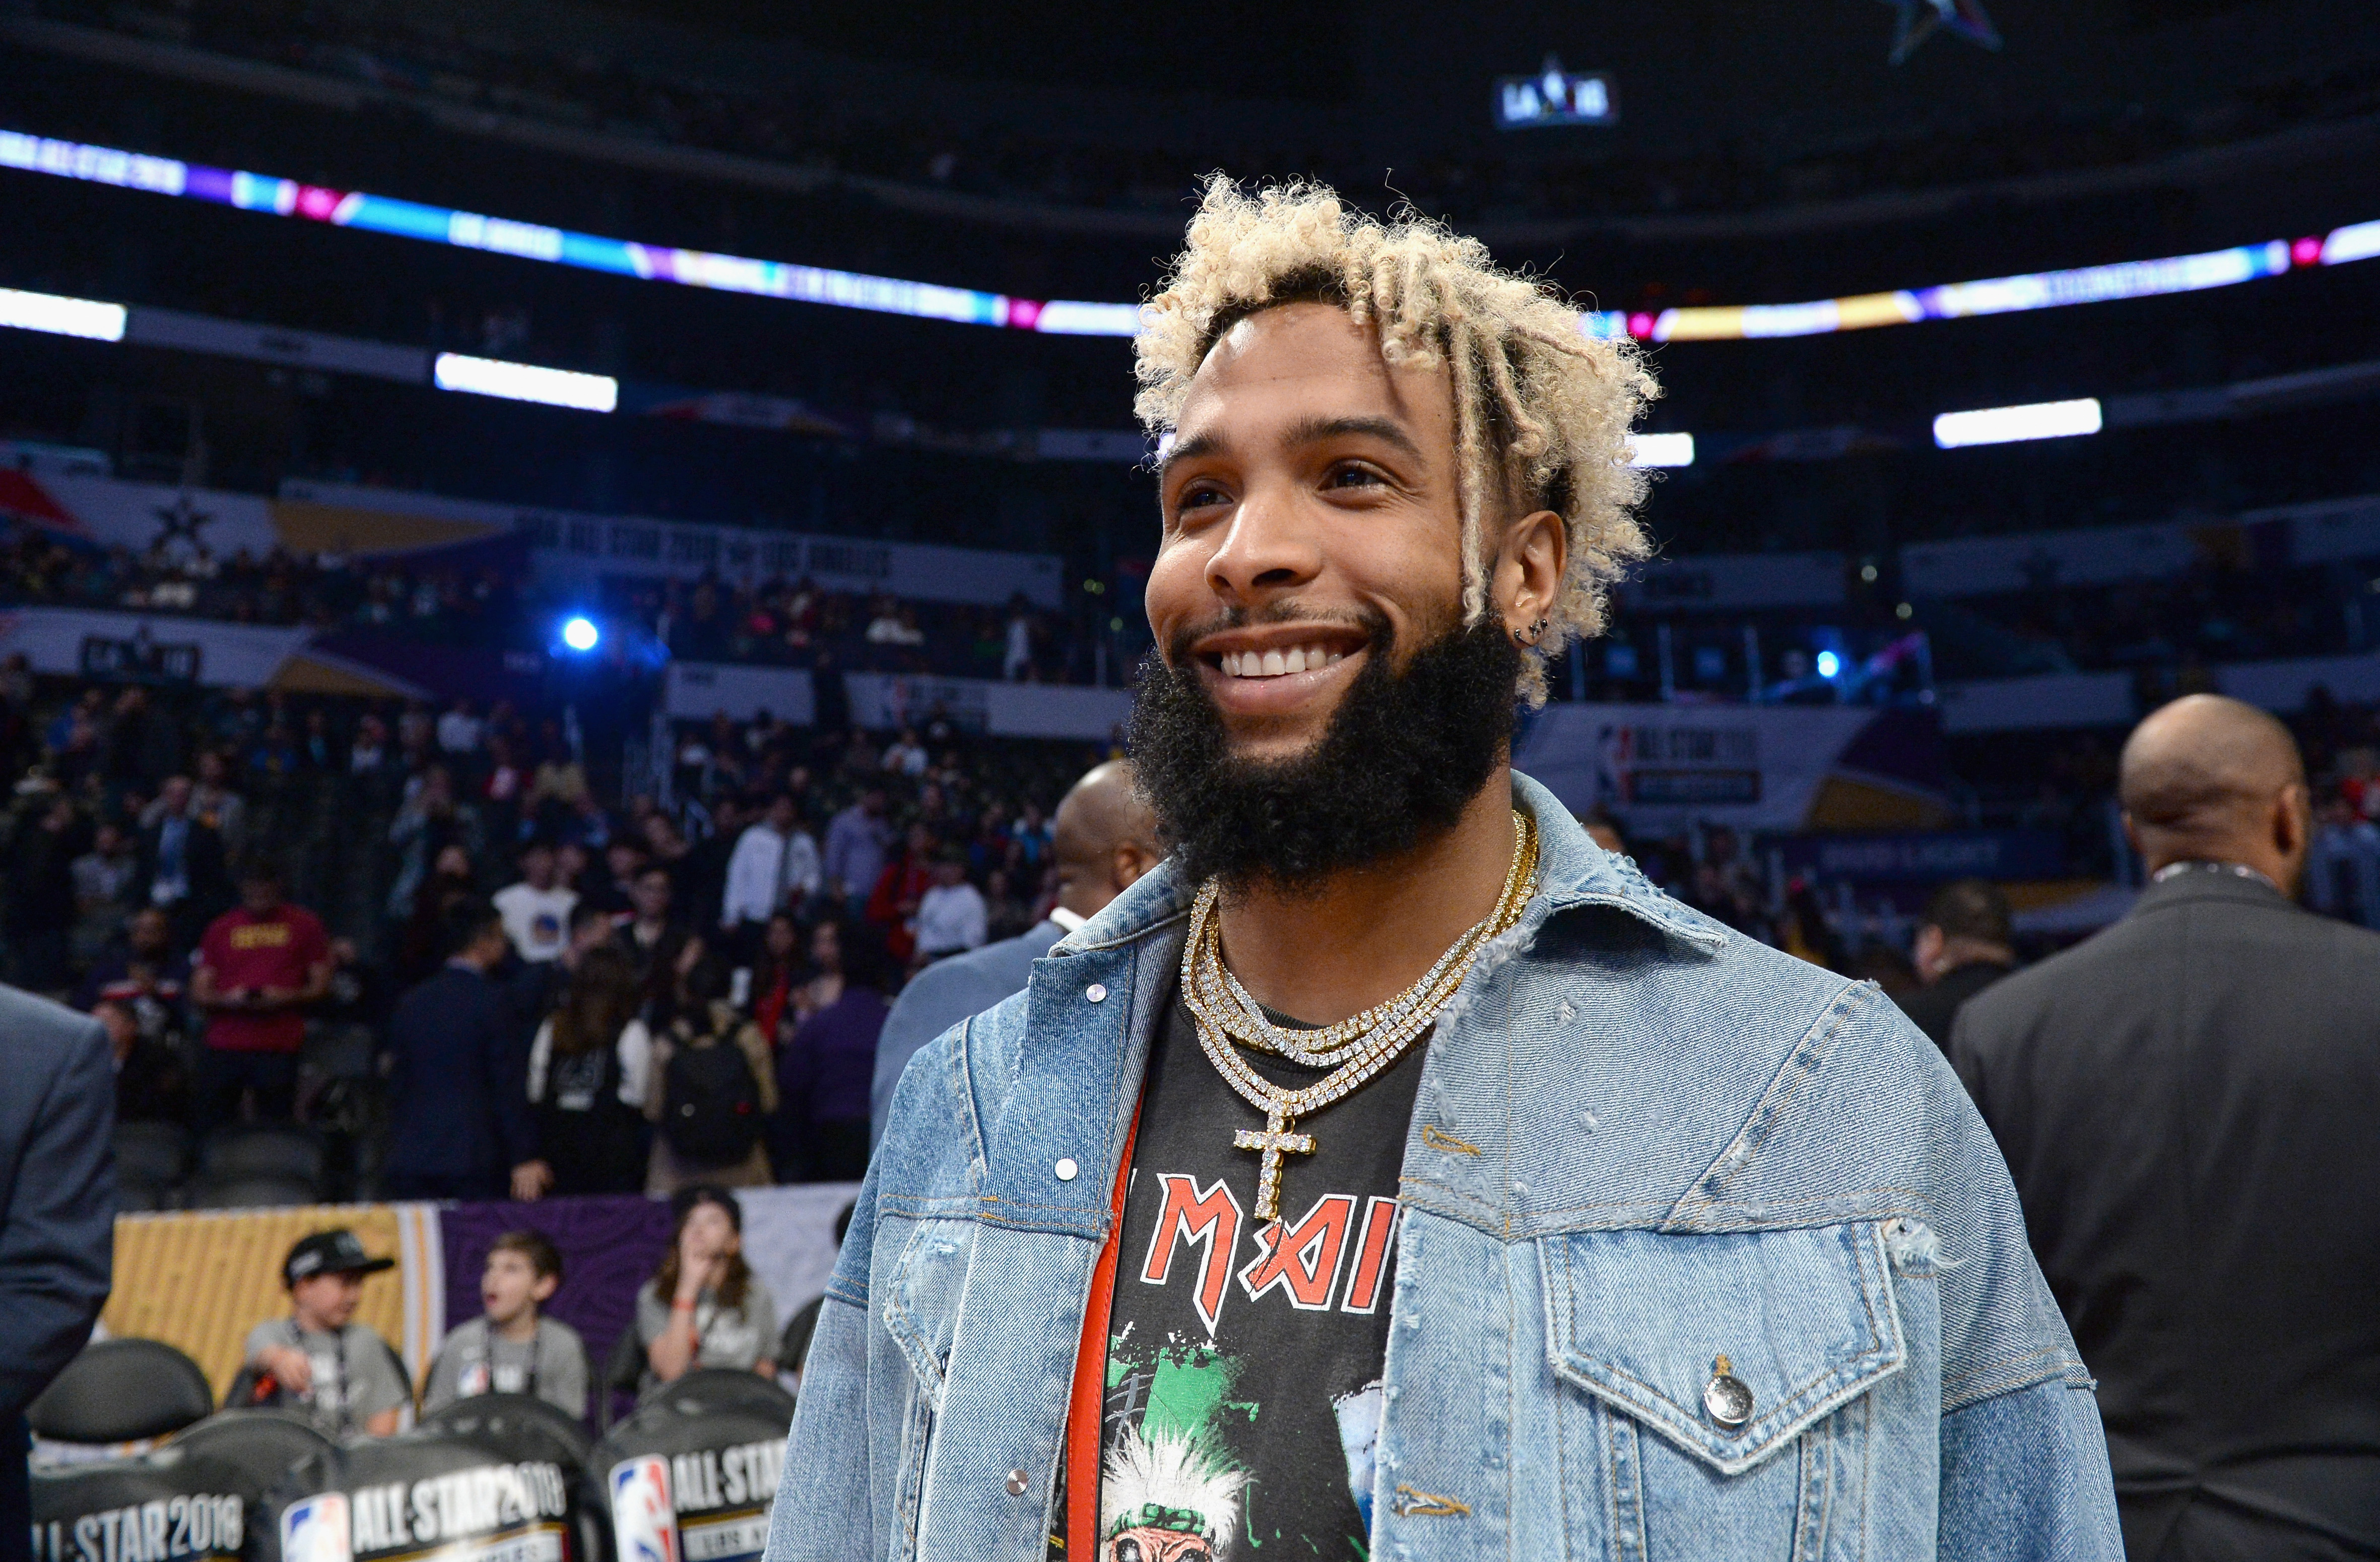 Odell Beckham Jr. attends the NBA All-Star Game 2018 at Staples Center on February 18, 2018 in Los Angeles, California.  (Photo by Kevork Djansezian/Getty Images)